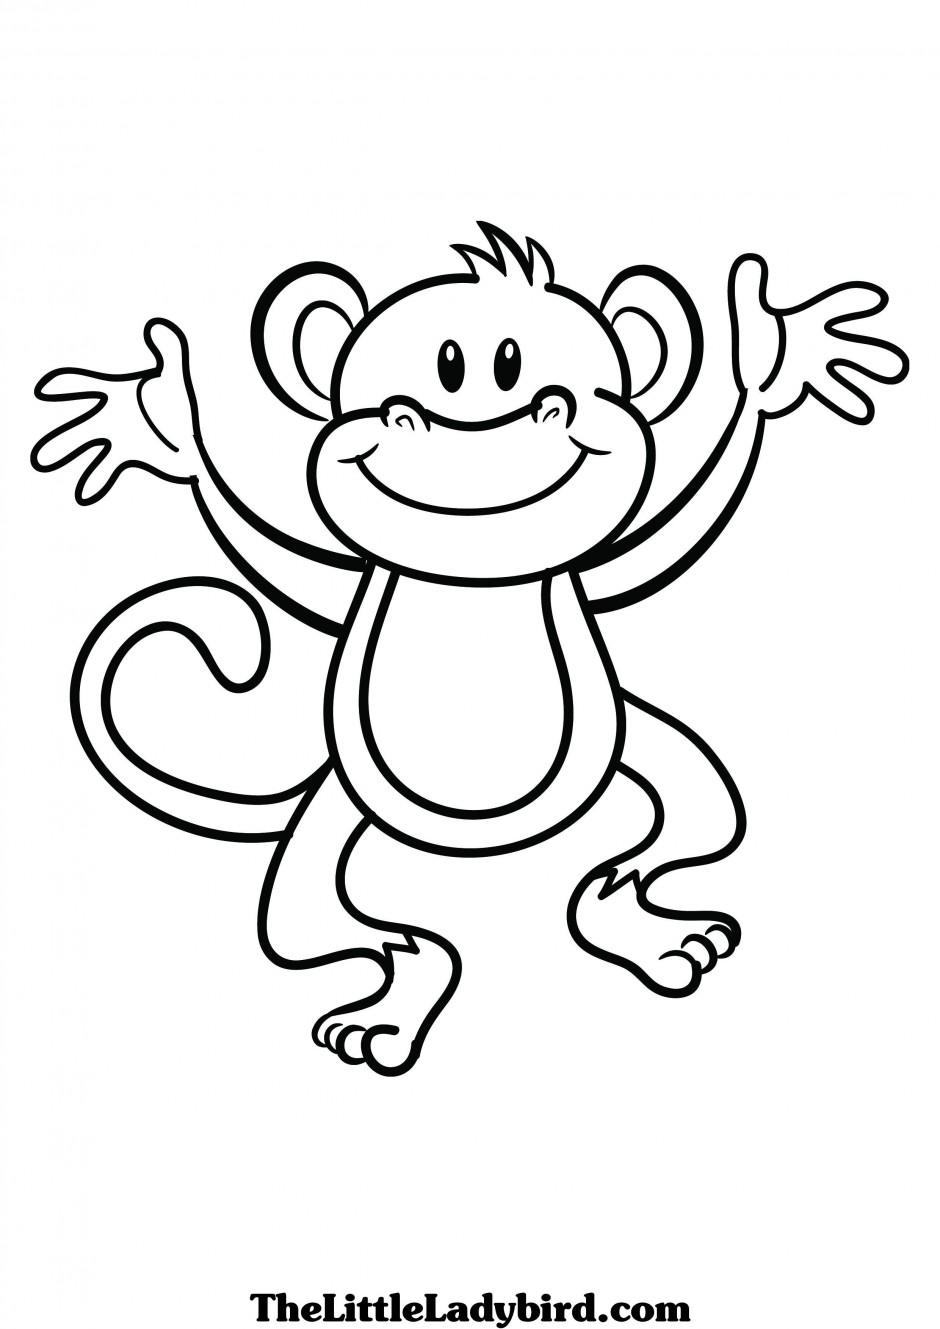 Cute Monkey Clip Art Black And White Monkey Coloring Pages Monkey